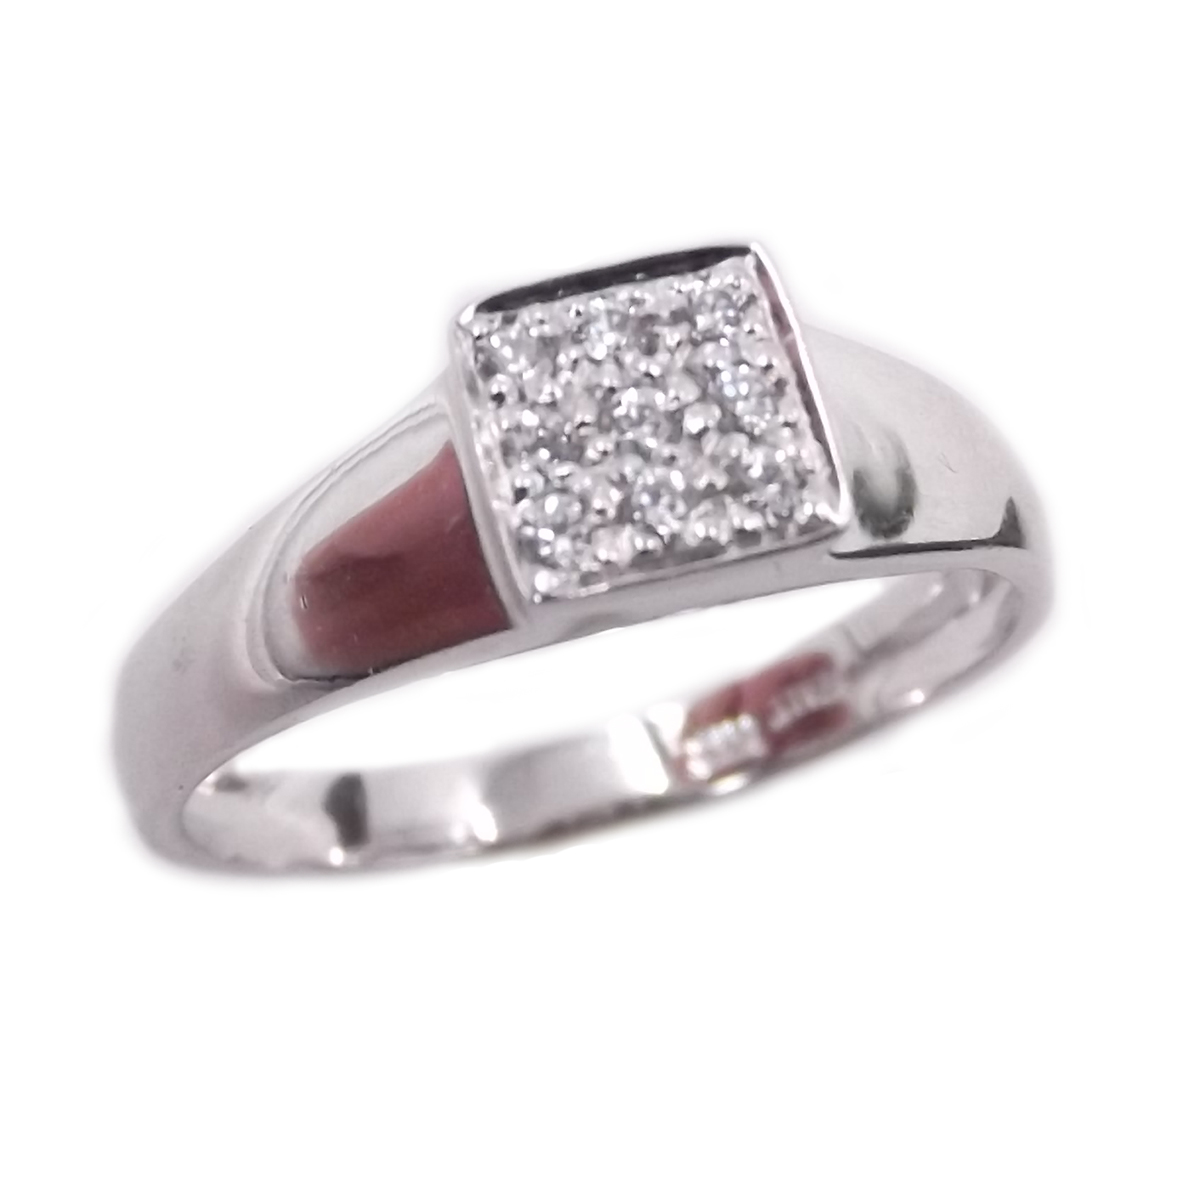 18kt white gold women's ring with diamonds for engagement diamond rings